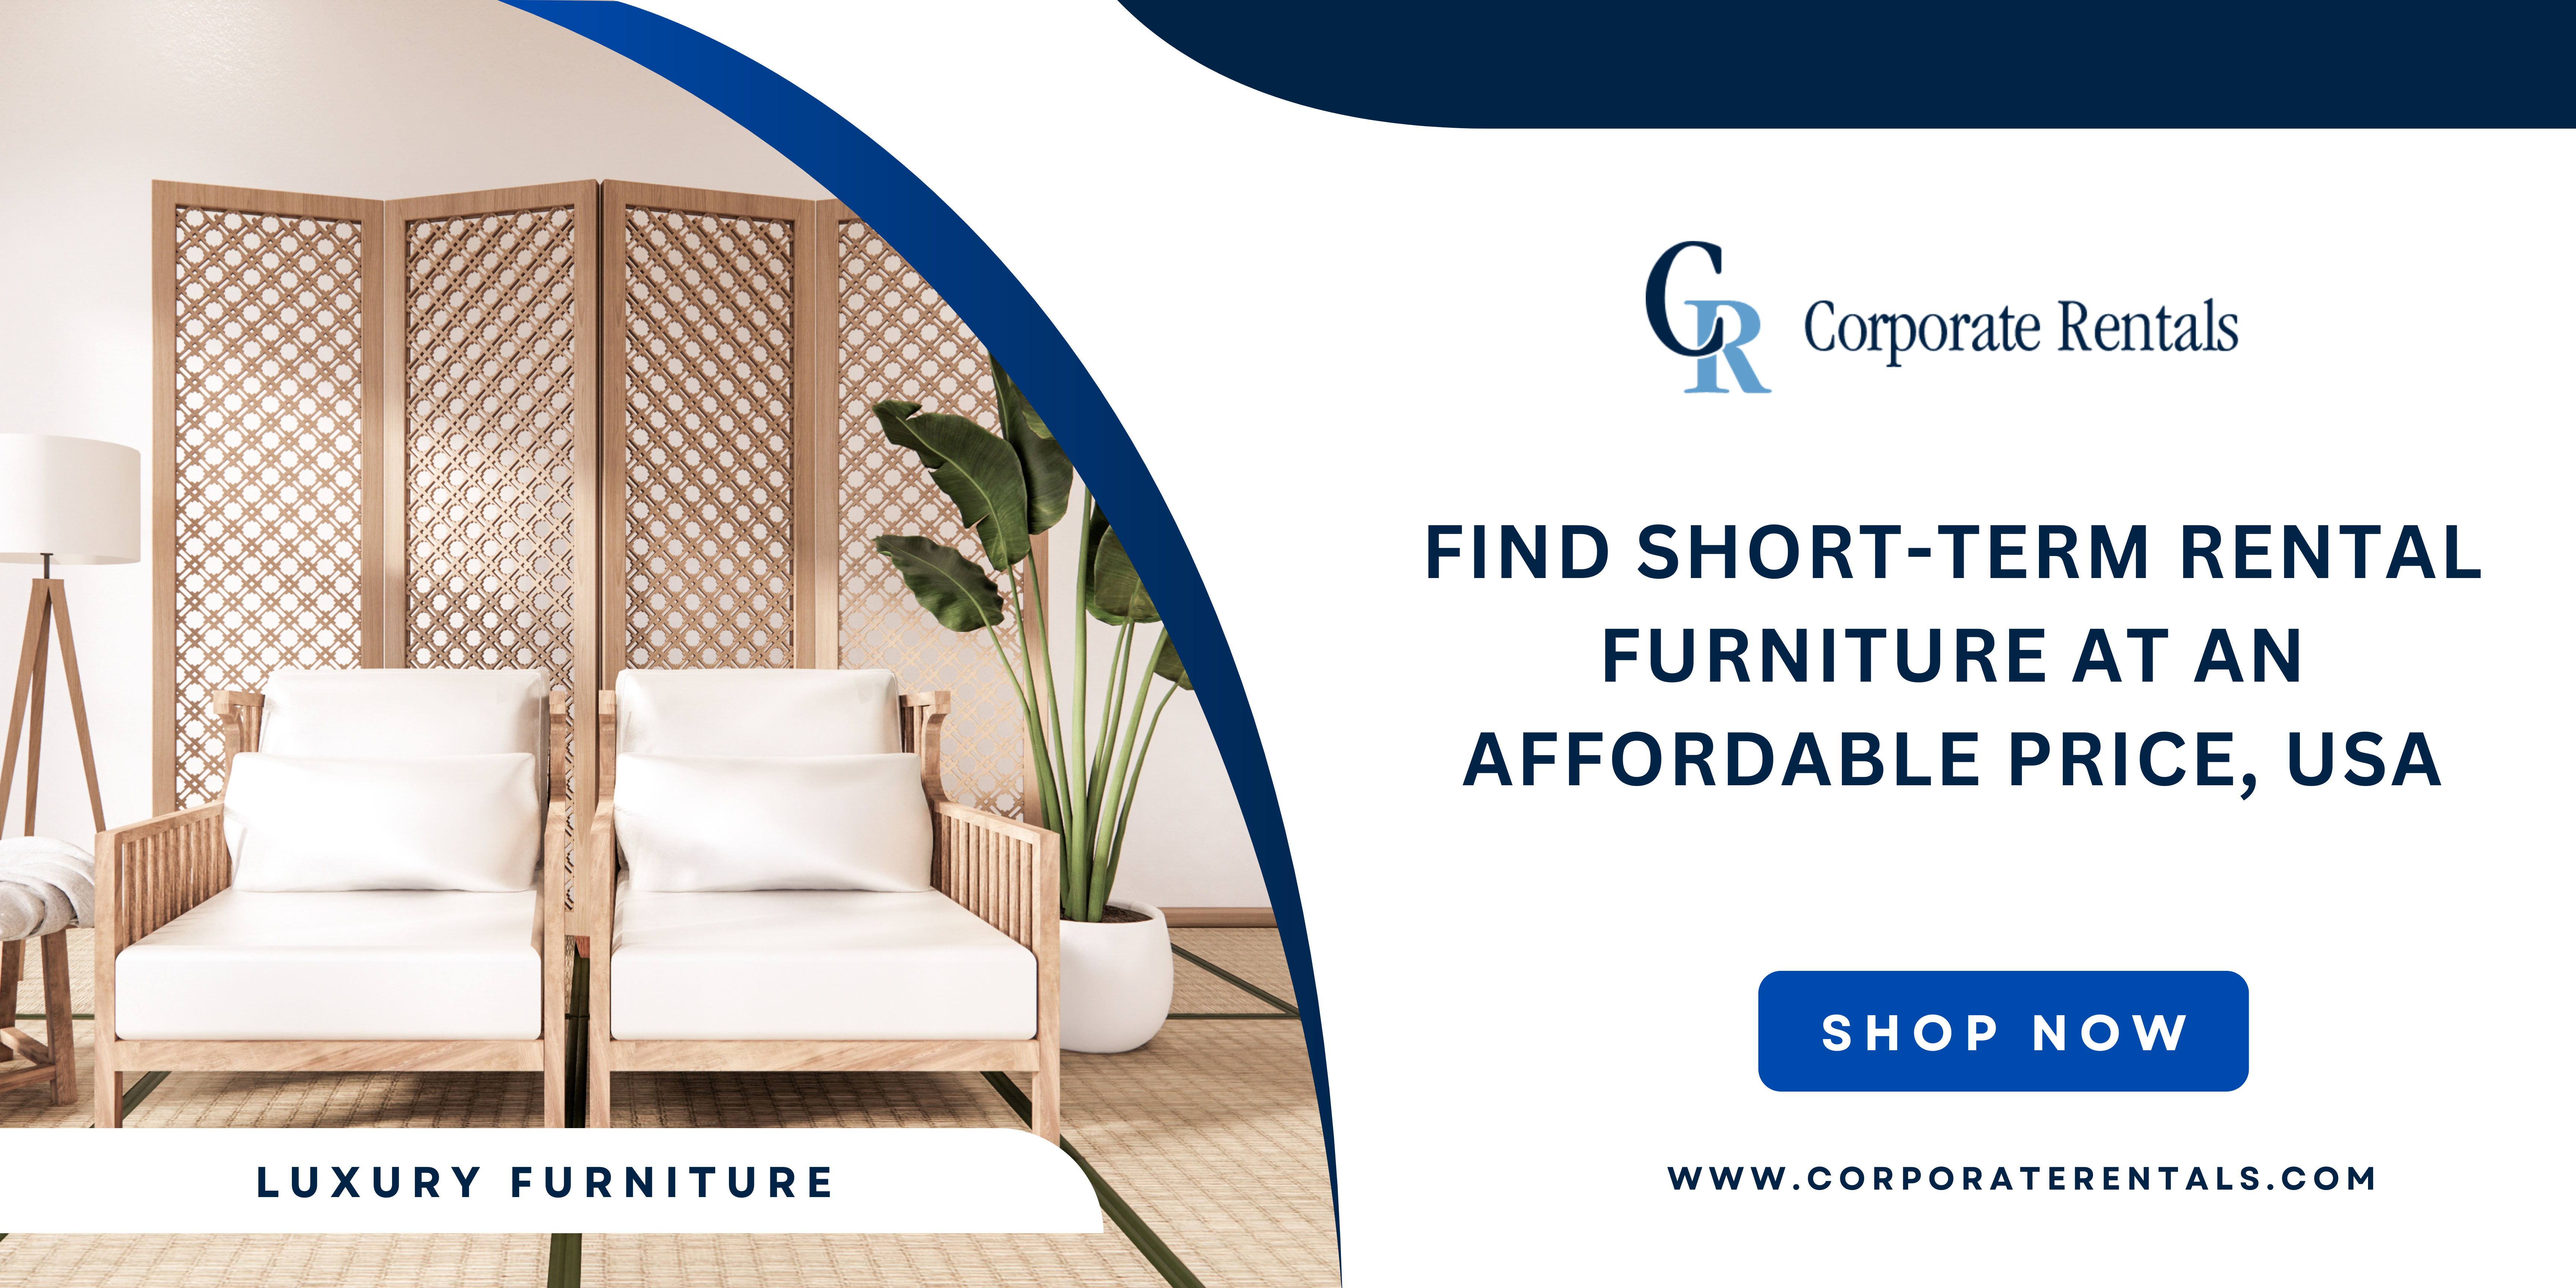 Find Short-Term Rental Furniture at an Affordable Price, USA